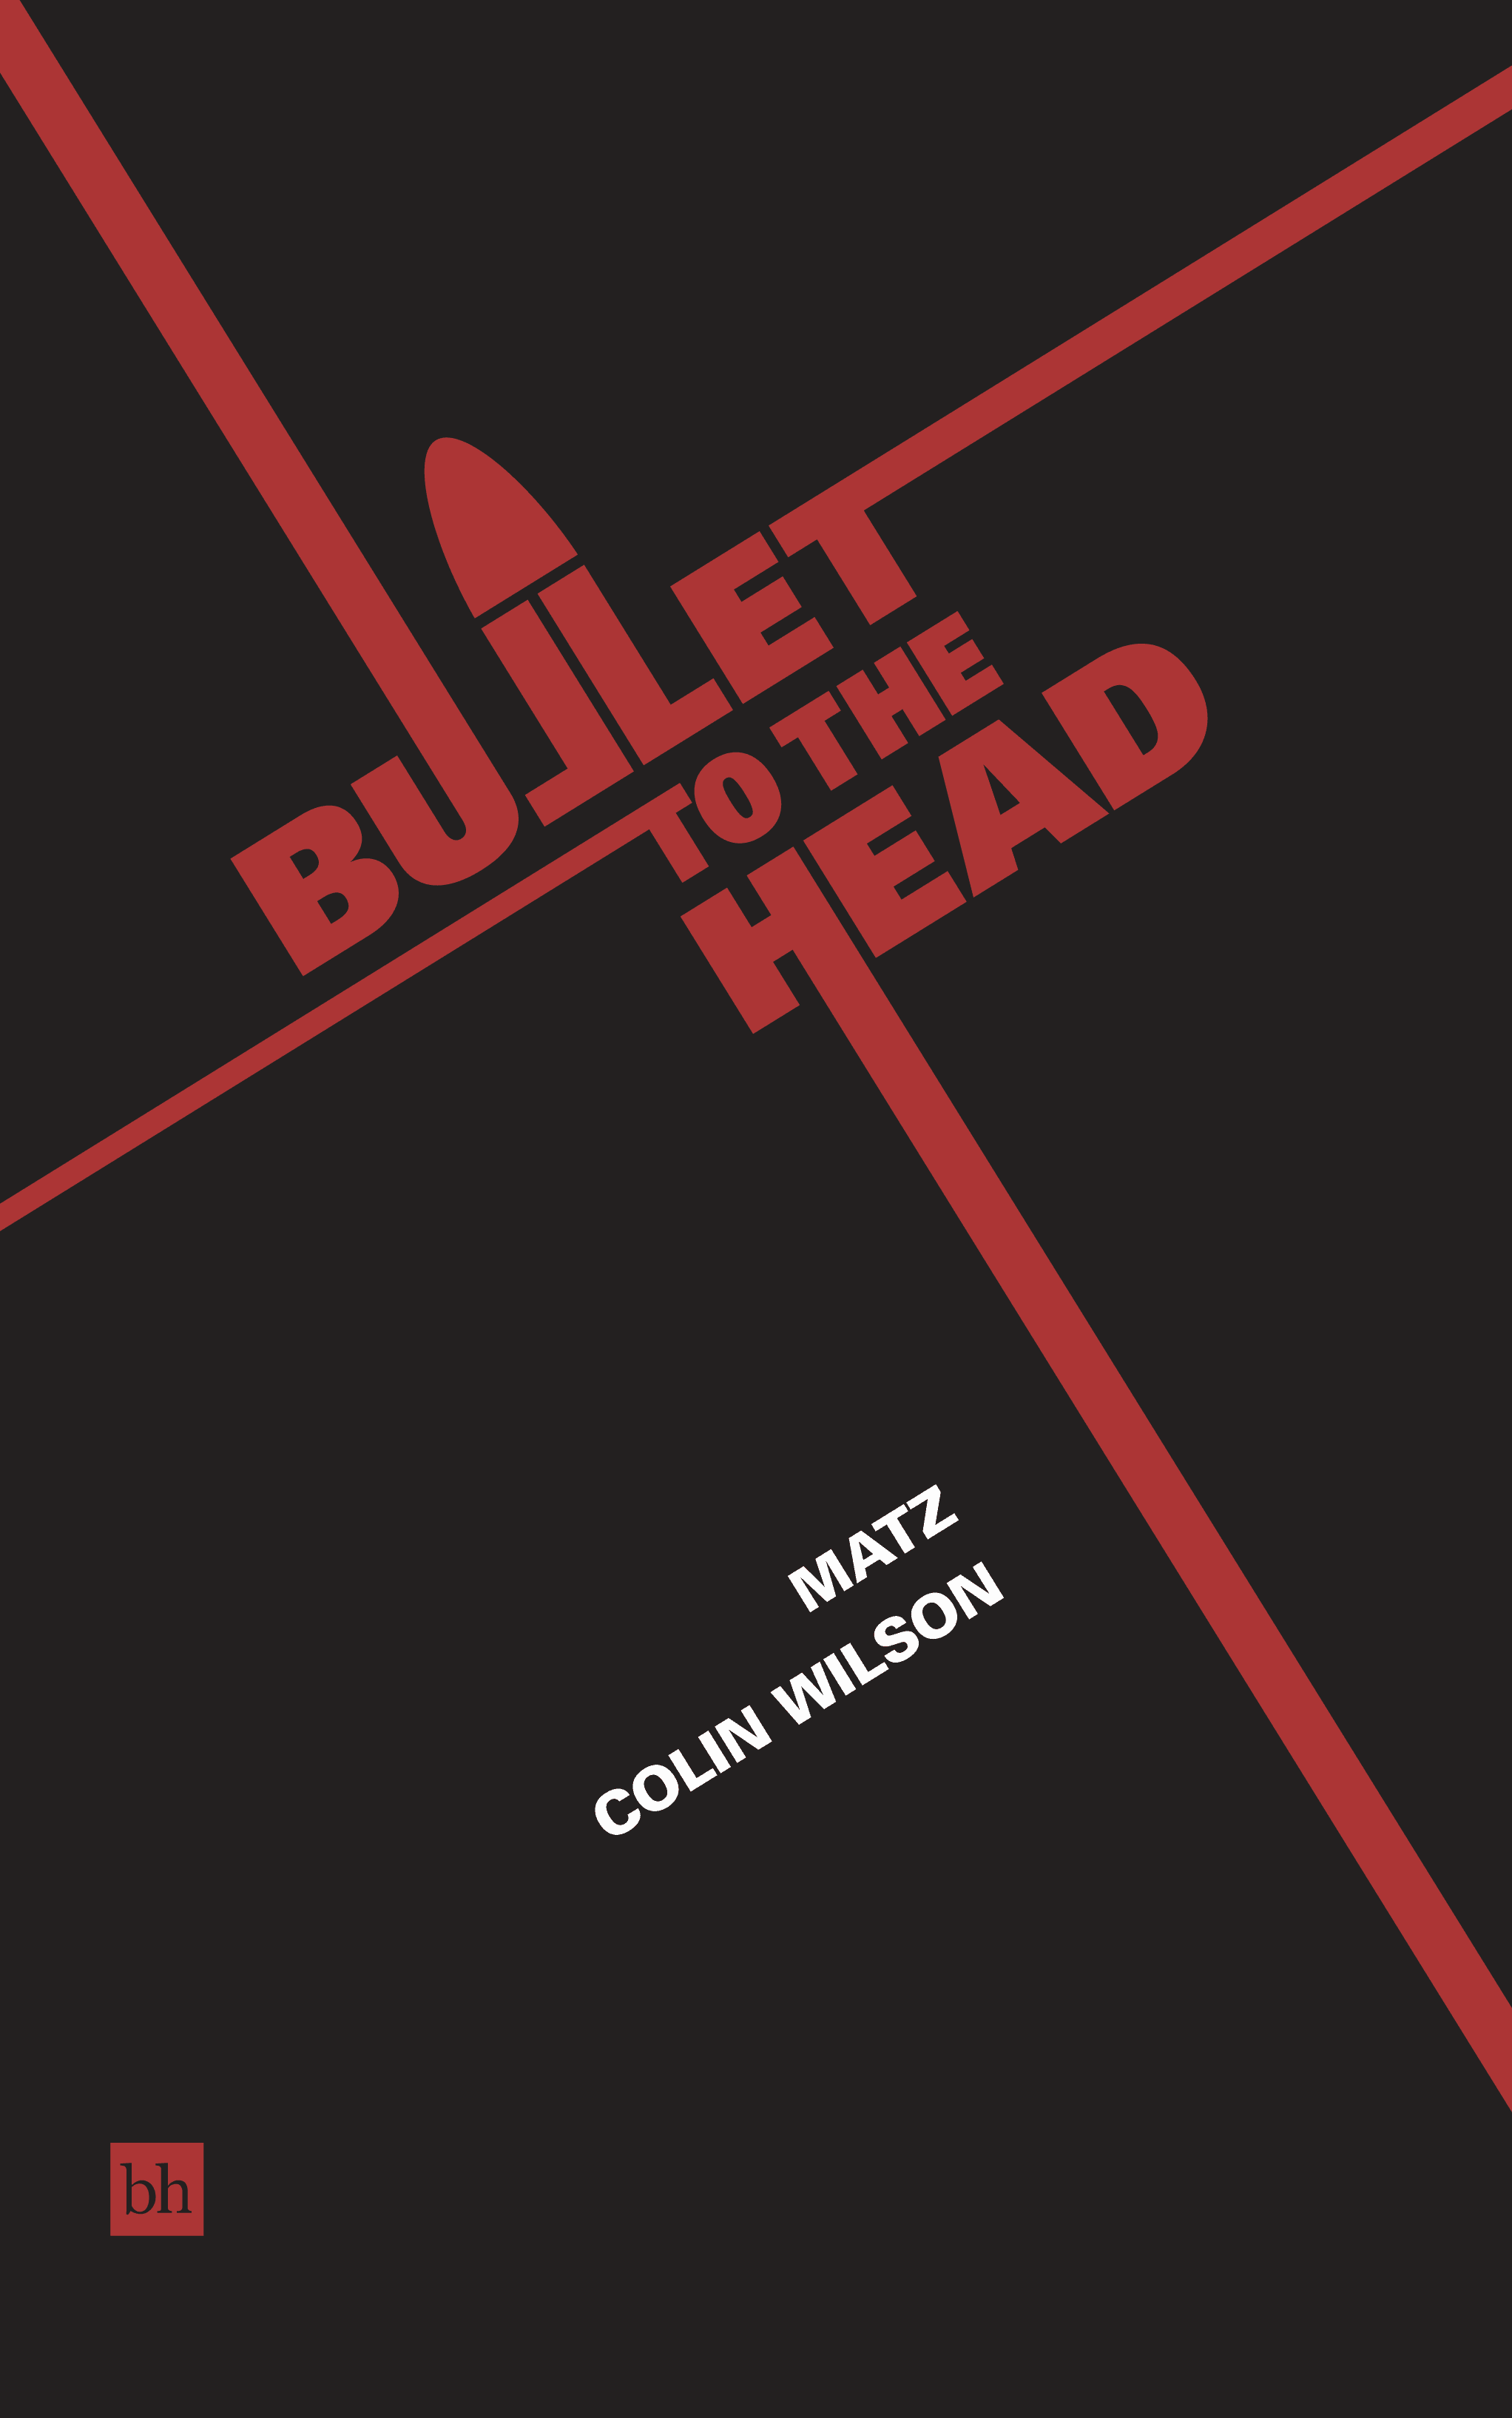 Book cover mock thumbnail for Bullet To The Head